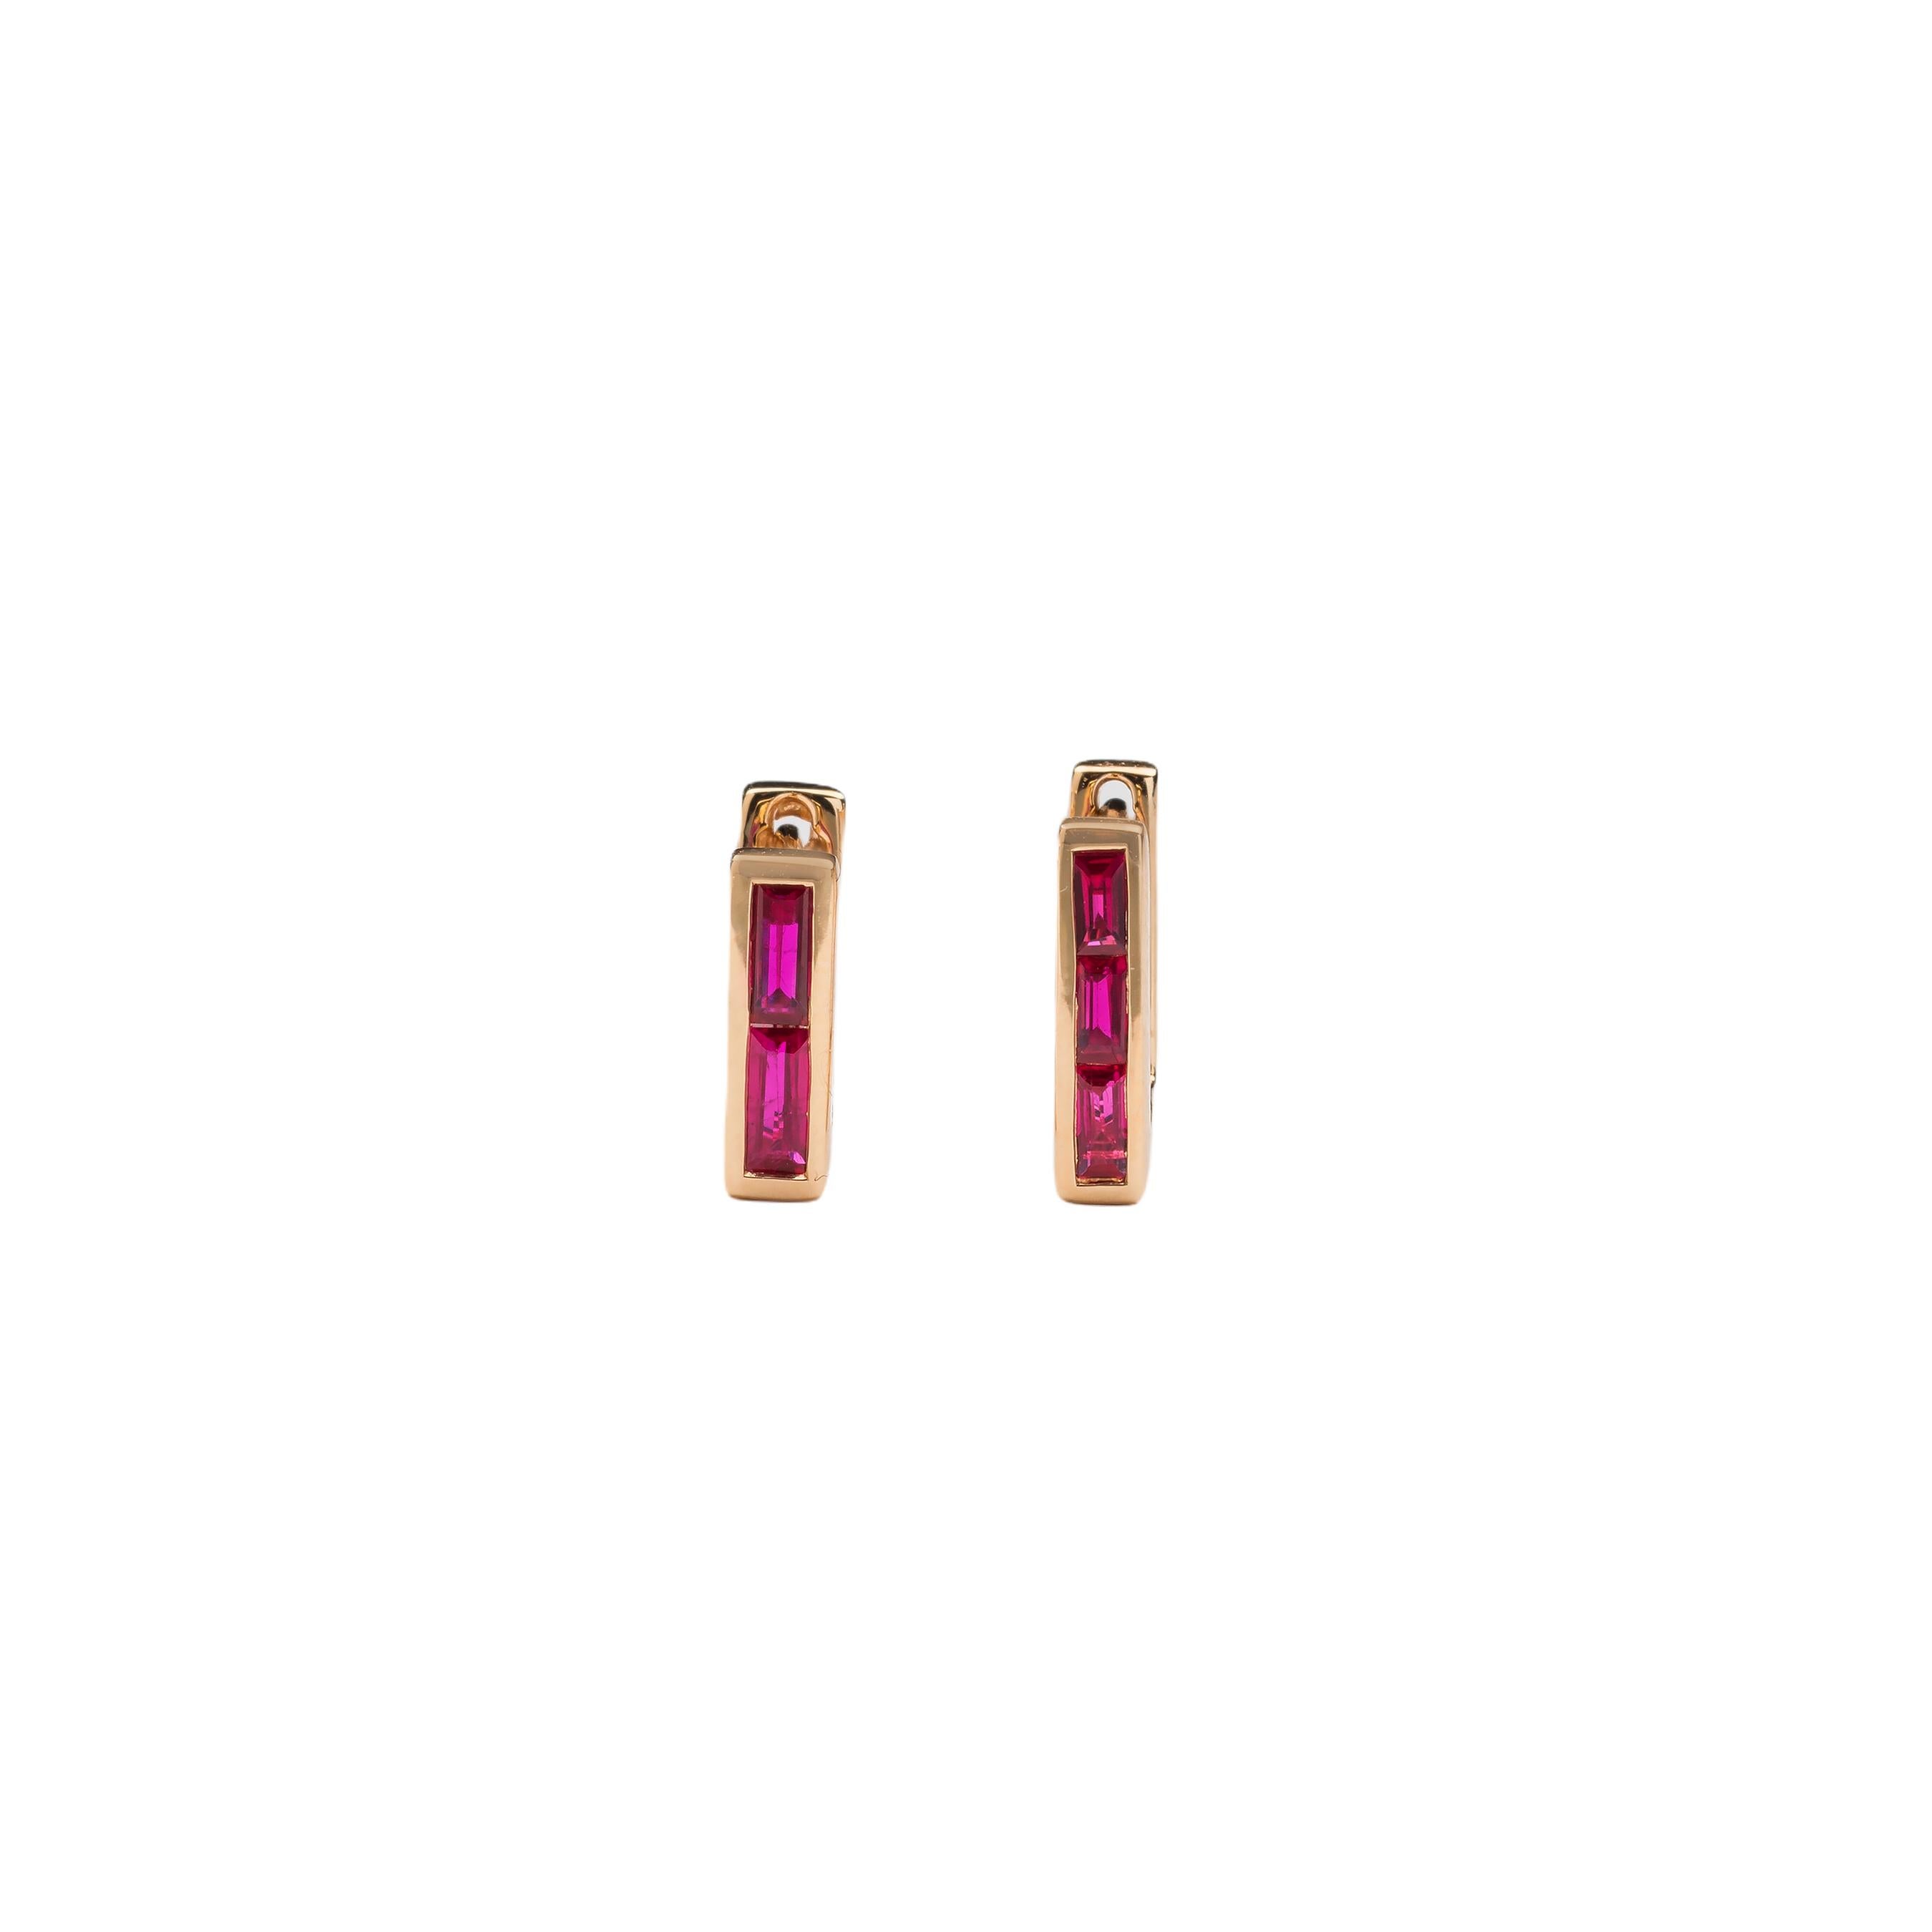 Baguette Cut Skinny Square Huggie Earrings with Three Ruby Baguettes For Sale